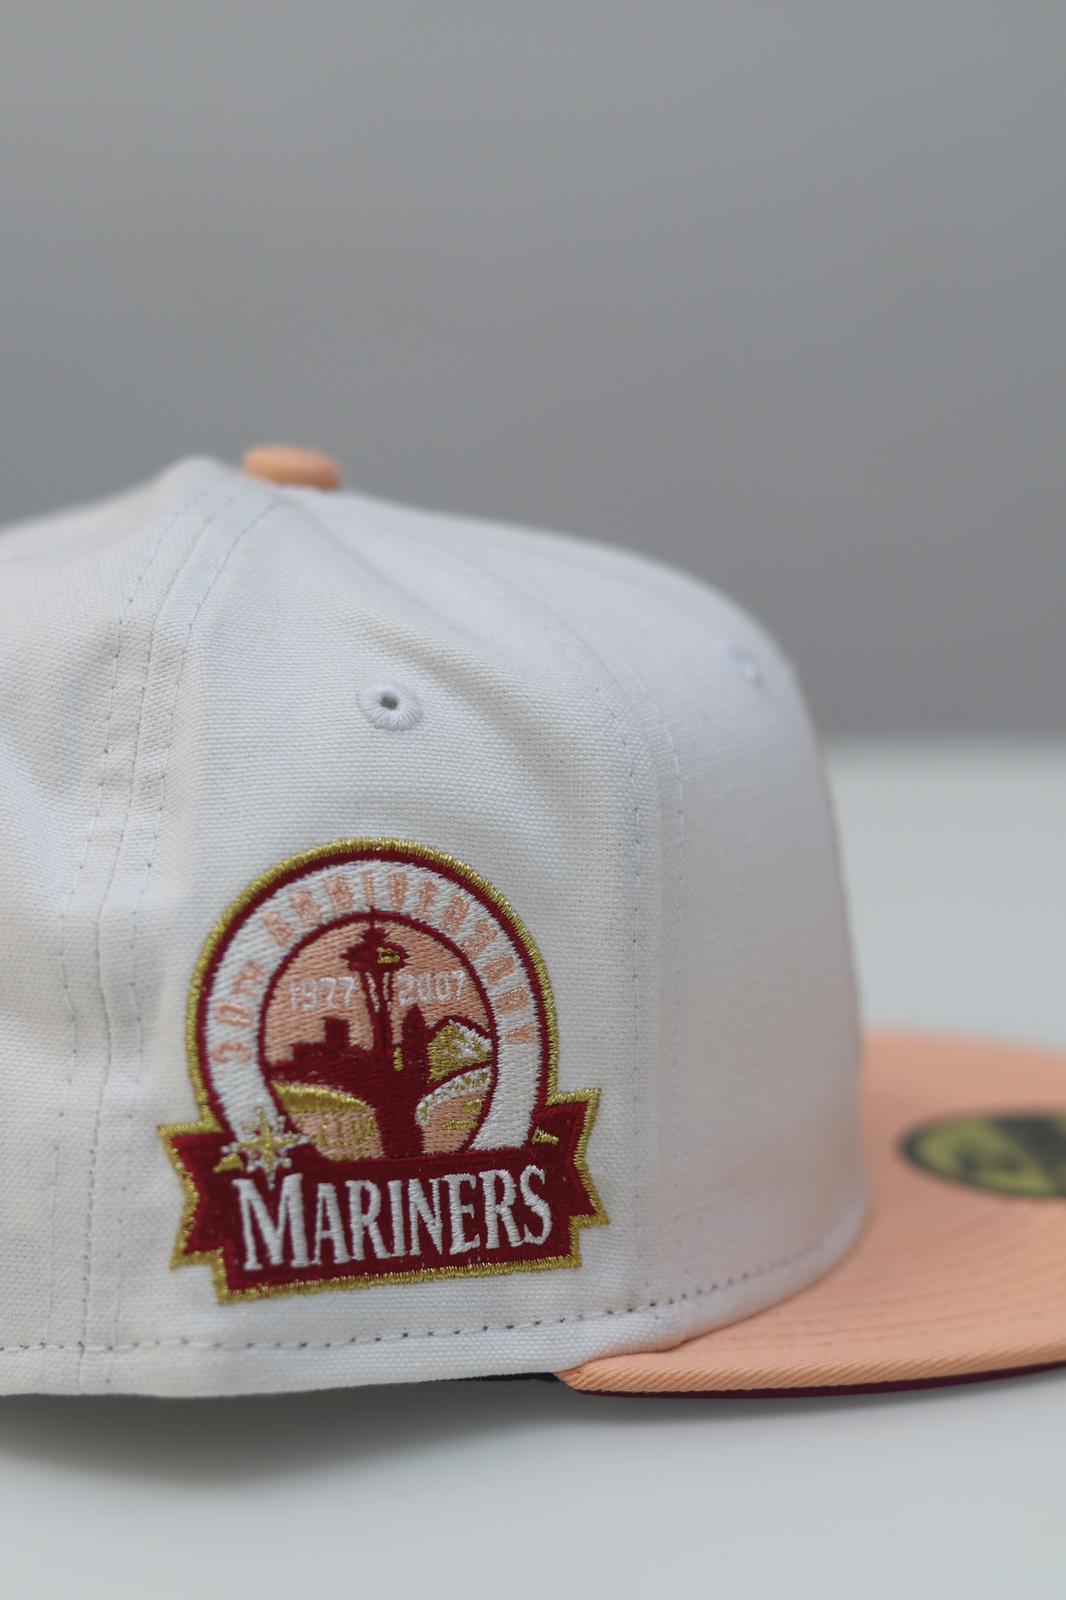 Seattle Mariners Two Tone "HATCLUB" Exclusive 59FIFTY Satin Burgundy Undervisor